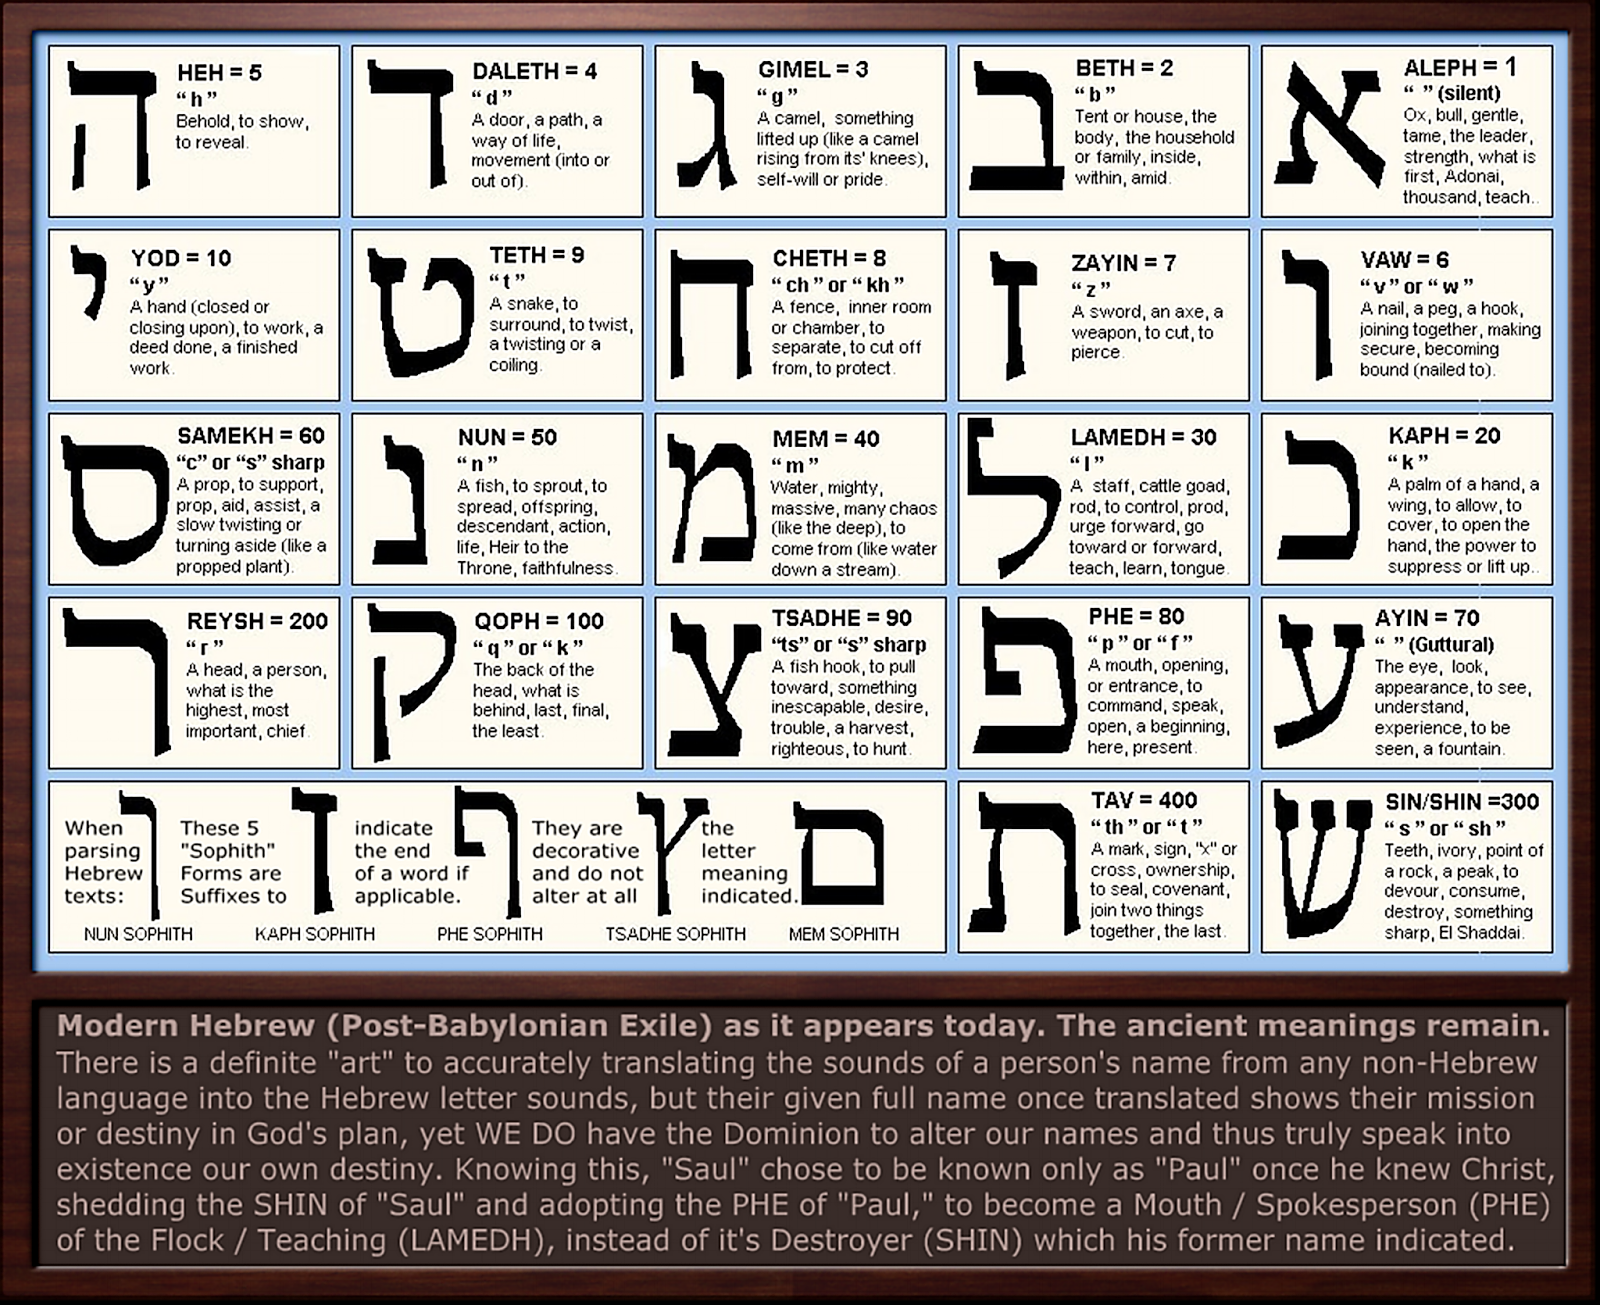 Do the letters of God's Hebrew name "El" make their own ...